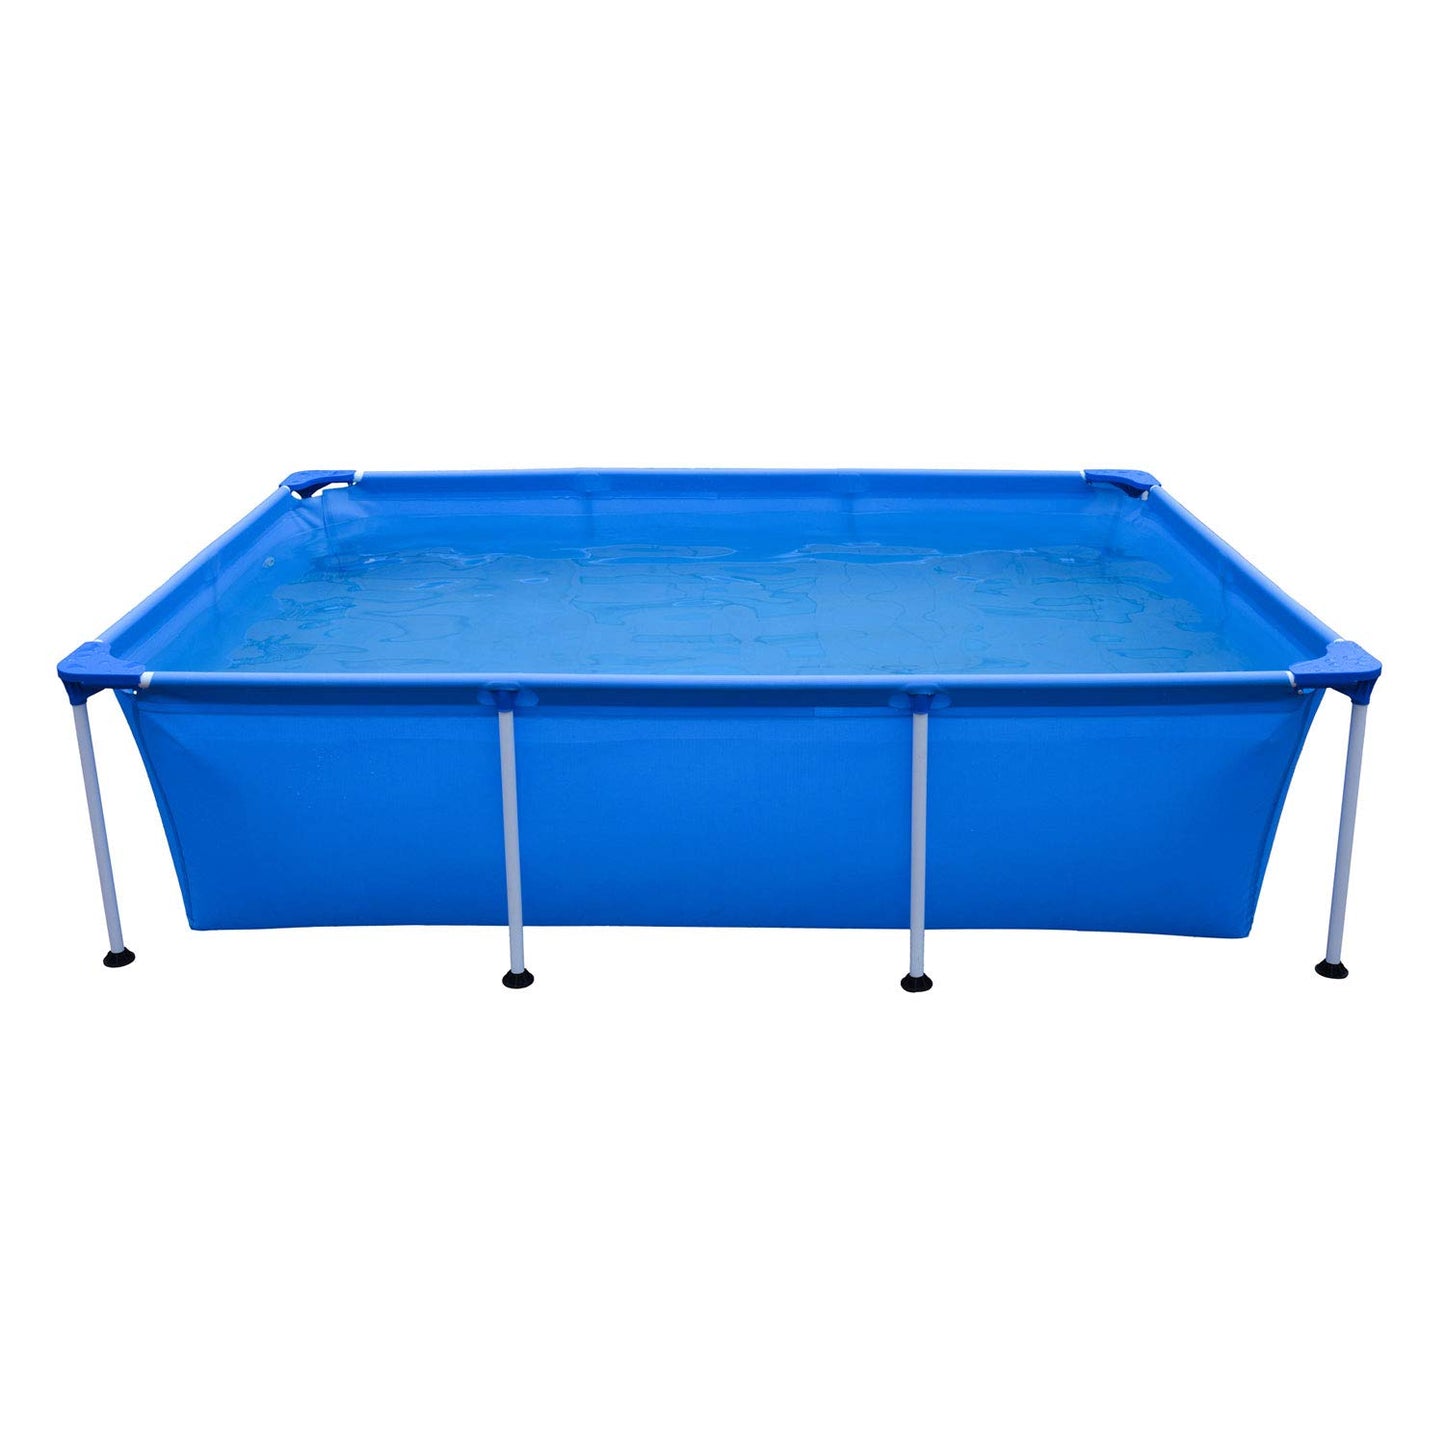 JLeisure Avenli 17818 8.5 x 6 x 2 Feet Outdoor Backyard Above Ground Rectangular Steel Frame Swimming Pool with Repair Patch for Kids & Adults, Blue 8.5' x 6'